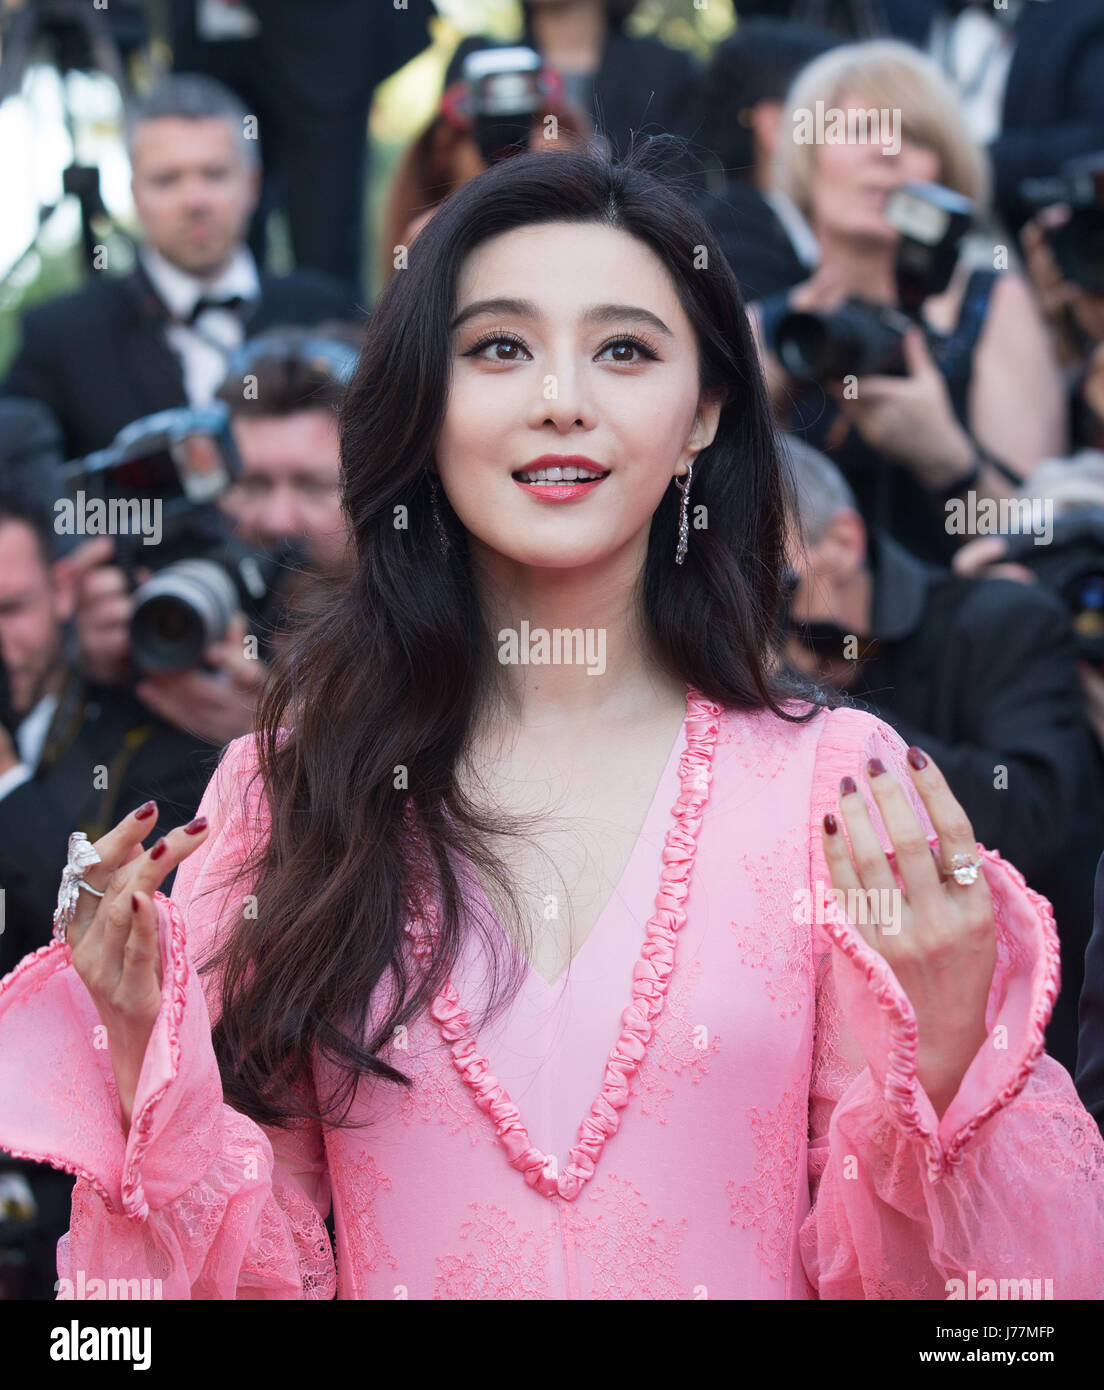 Cannes, France. 23rd May, 2017Jury member of the 70th Cannes International Film Festival, Chinese actress Fan Bingbing attends the "70th Anniversary" ceremony of the Cannes Film Festival in Cannes, France, May 23, 2017. (Xinhua/Xu Jinquan) (jmmn) Credit: Xinhua/Alamy Live News Stock Photo